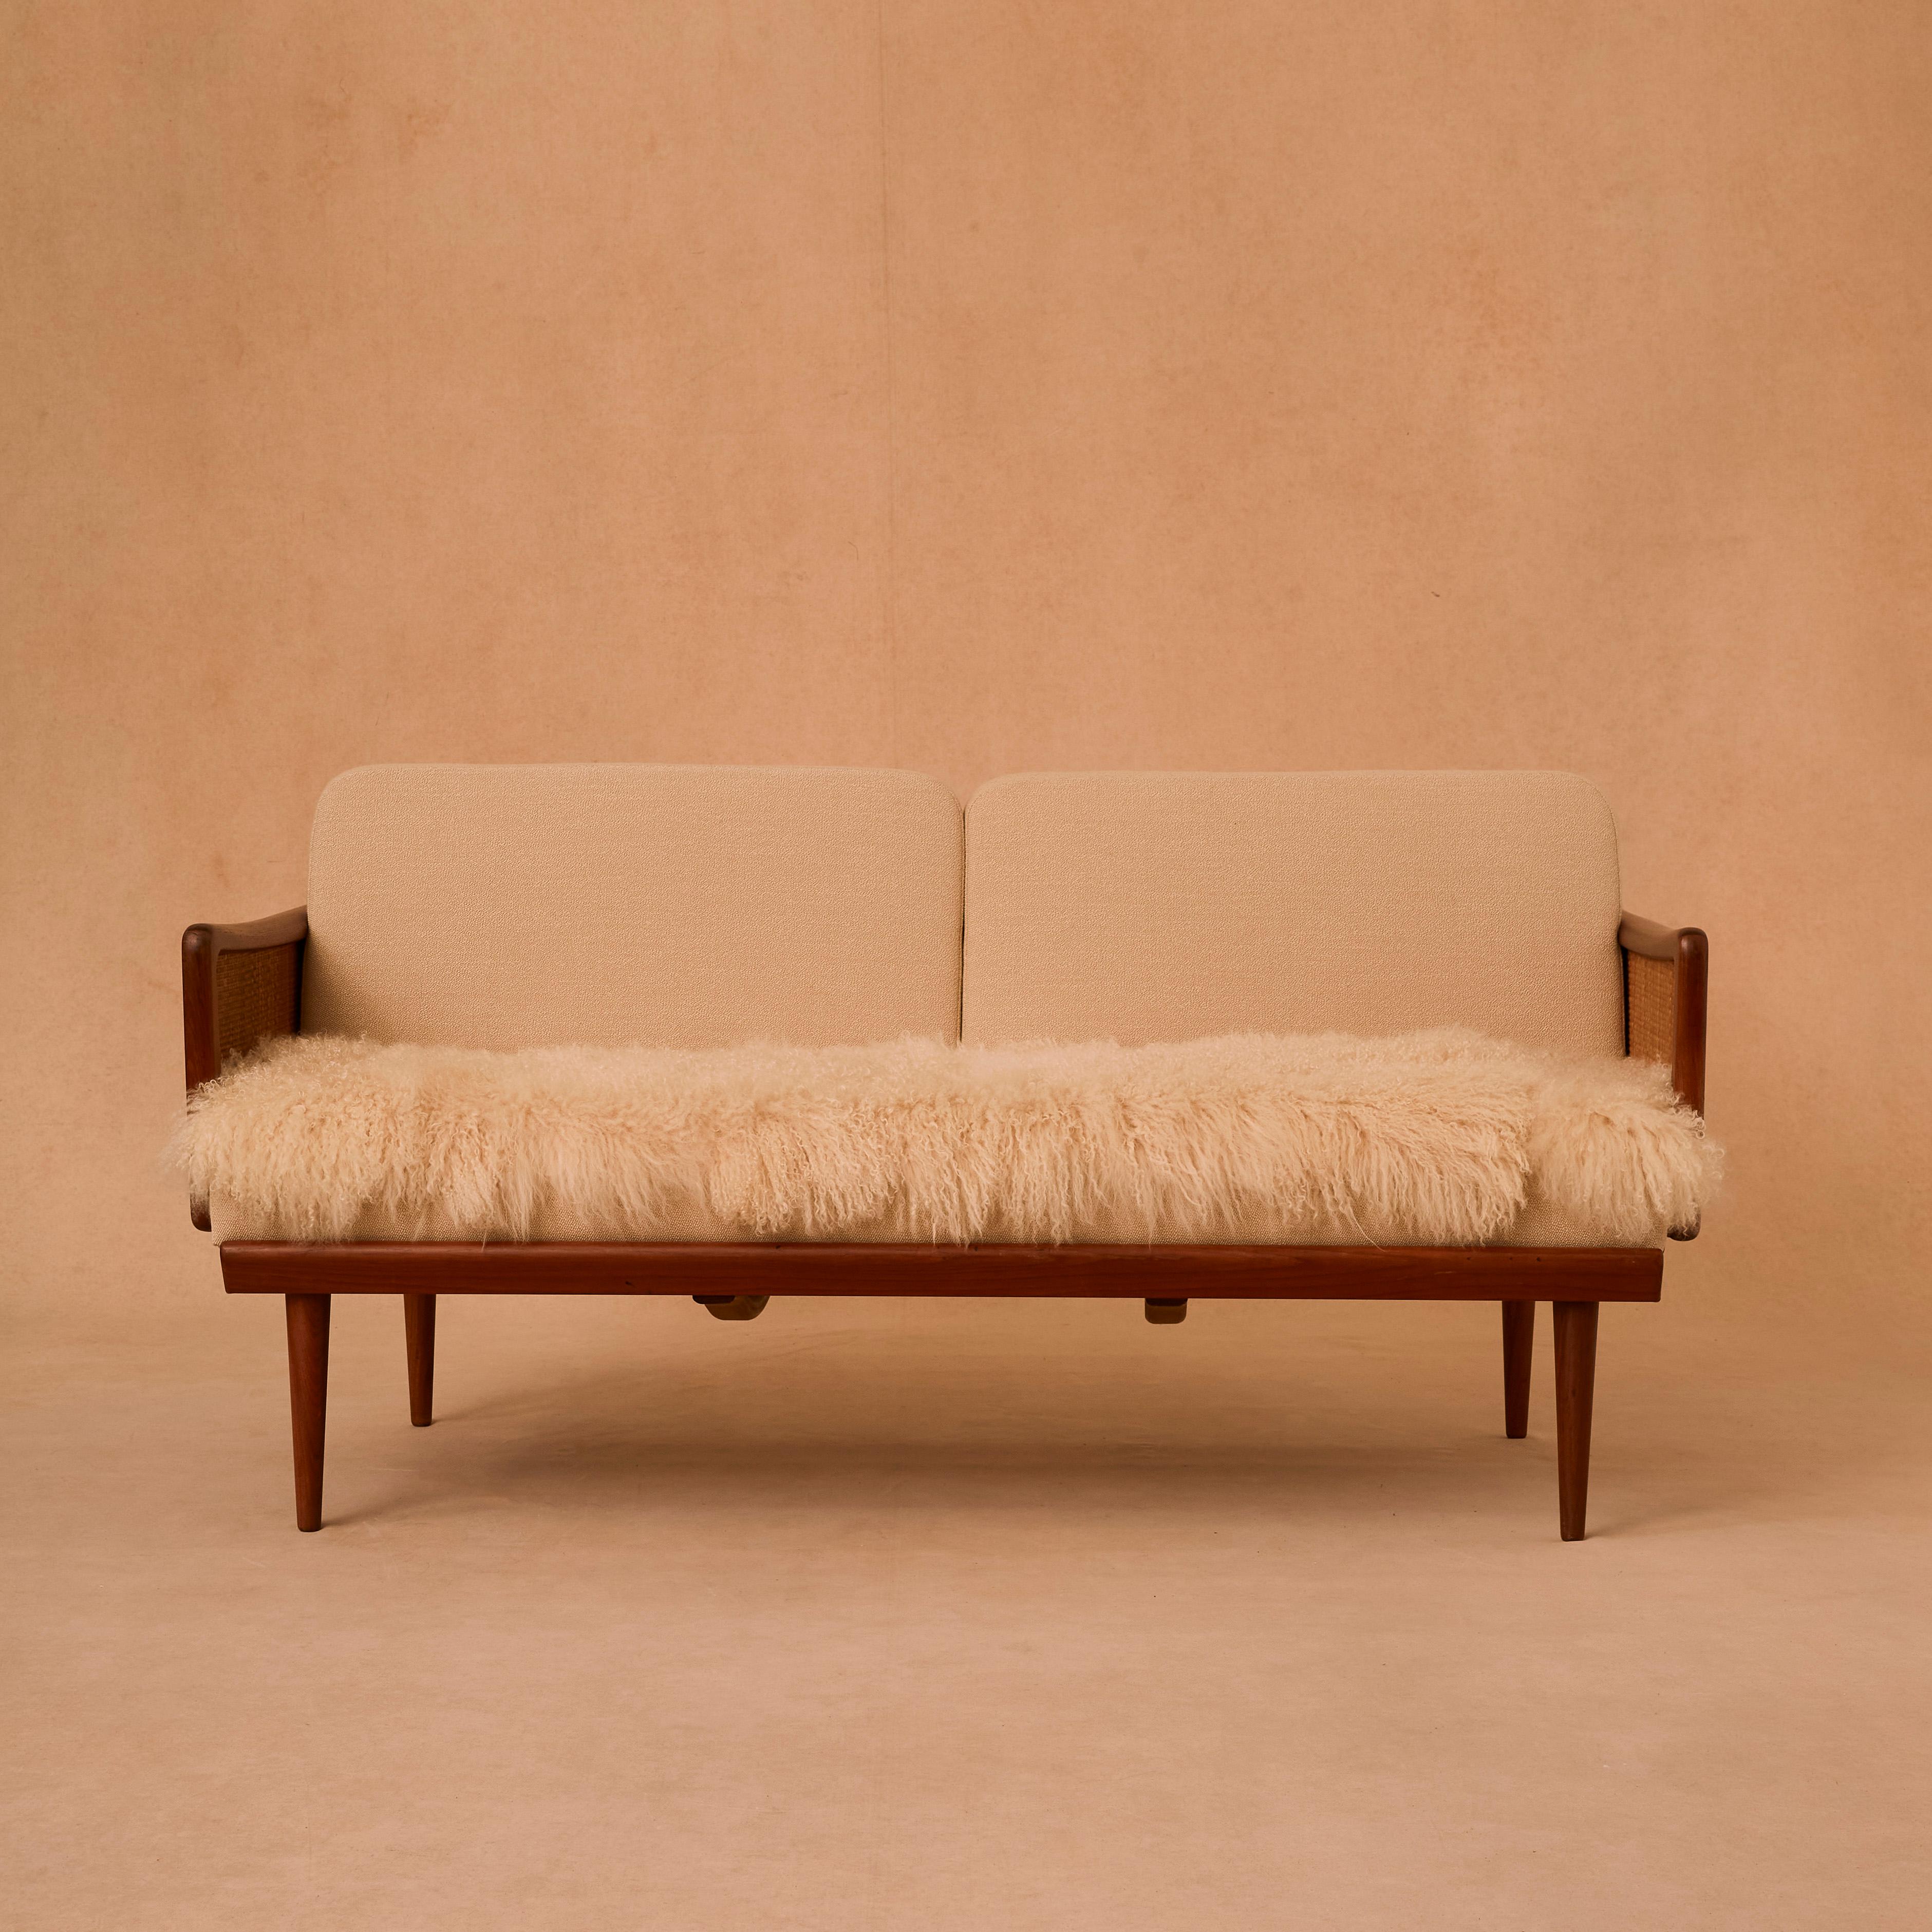 Beautiful sofa or daybed model FD 451 designed by Peter Hvidt & Orla Mølgaard-Nielsen. Produced by France & Søn in Denmark. Teak frame, with woven cane details. Newly upholstery made with Classic Kvadrat wool fabric and Mongolian sheep skin. The